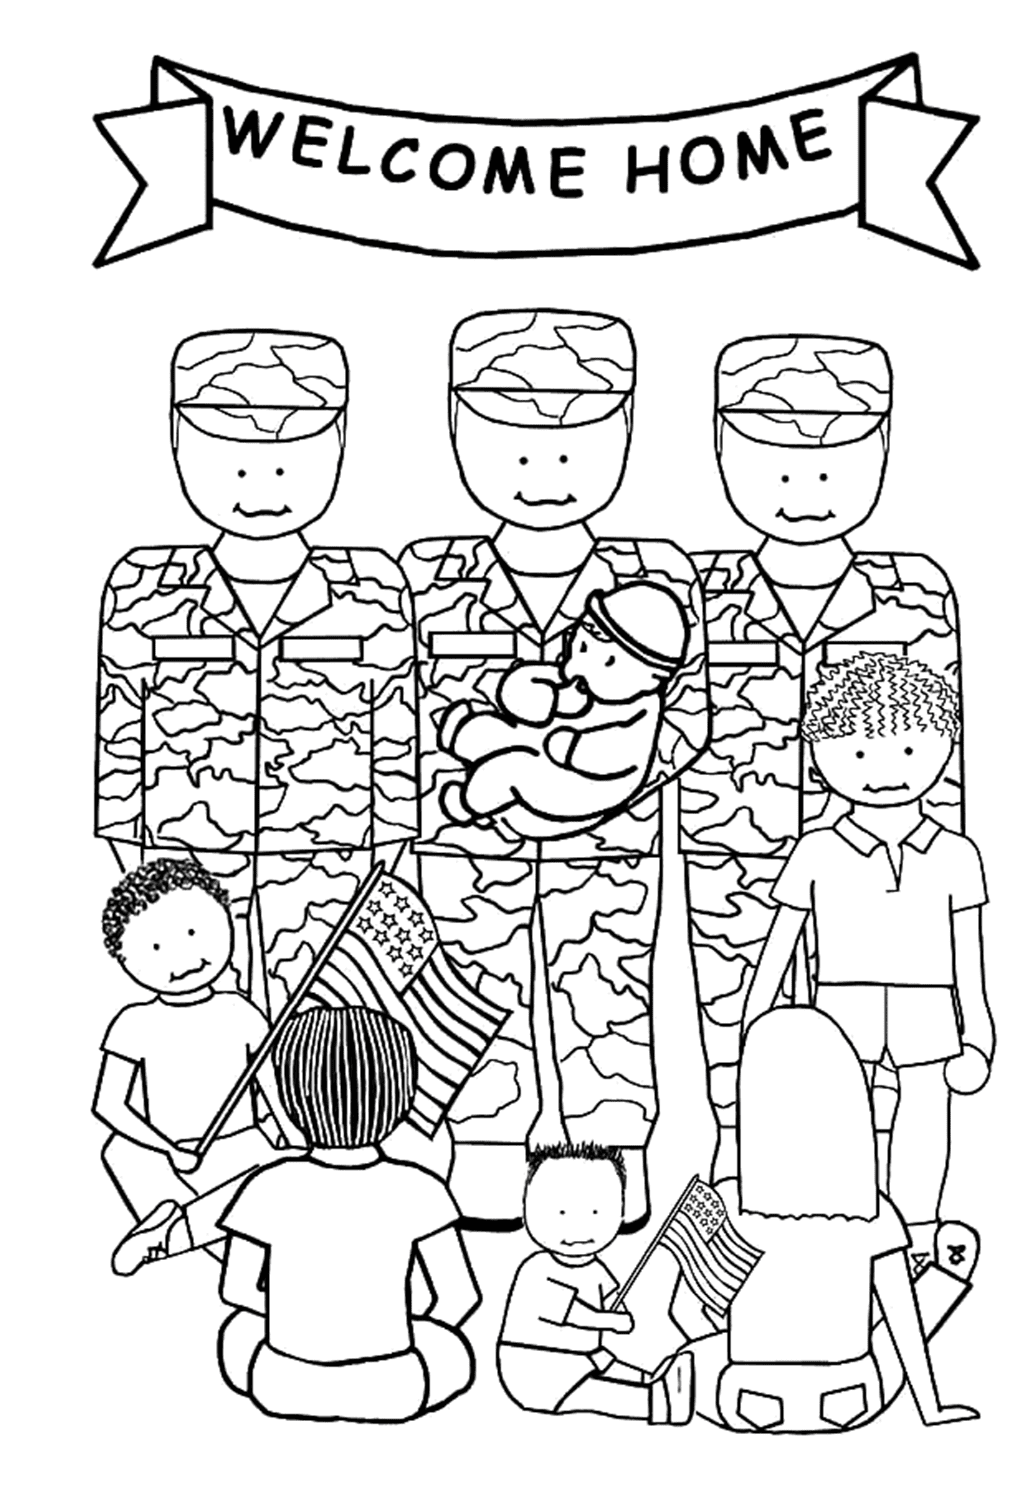 Welcome Home Veterans Coloring Page